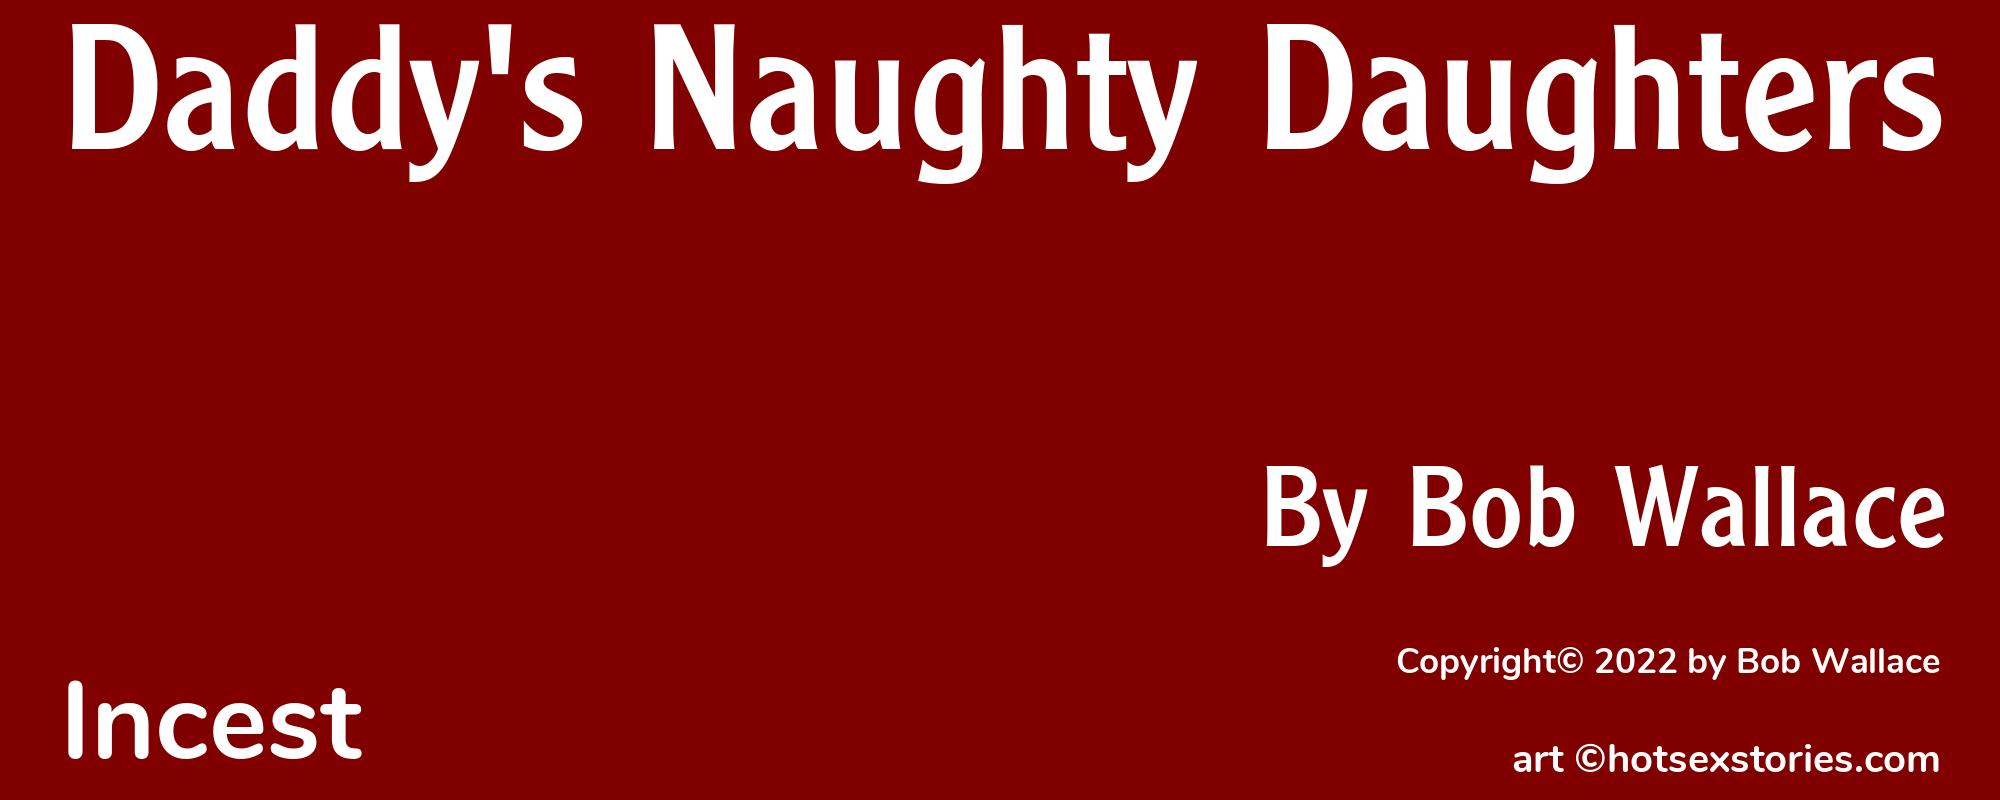 Daddy's Naughty Daughters - Cover